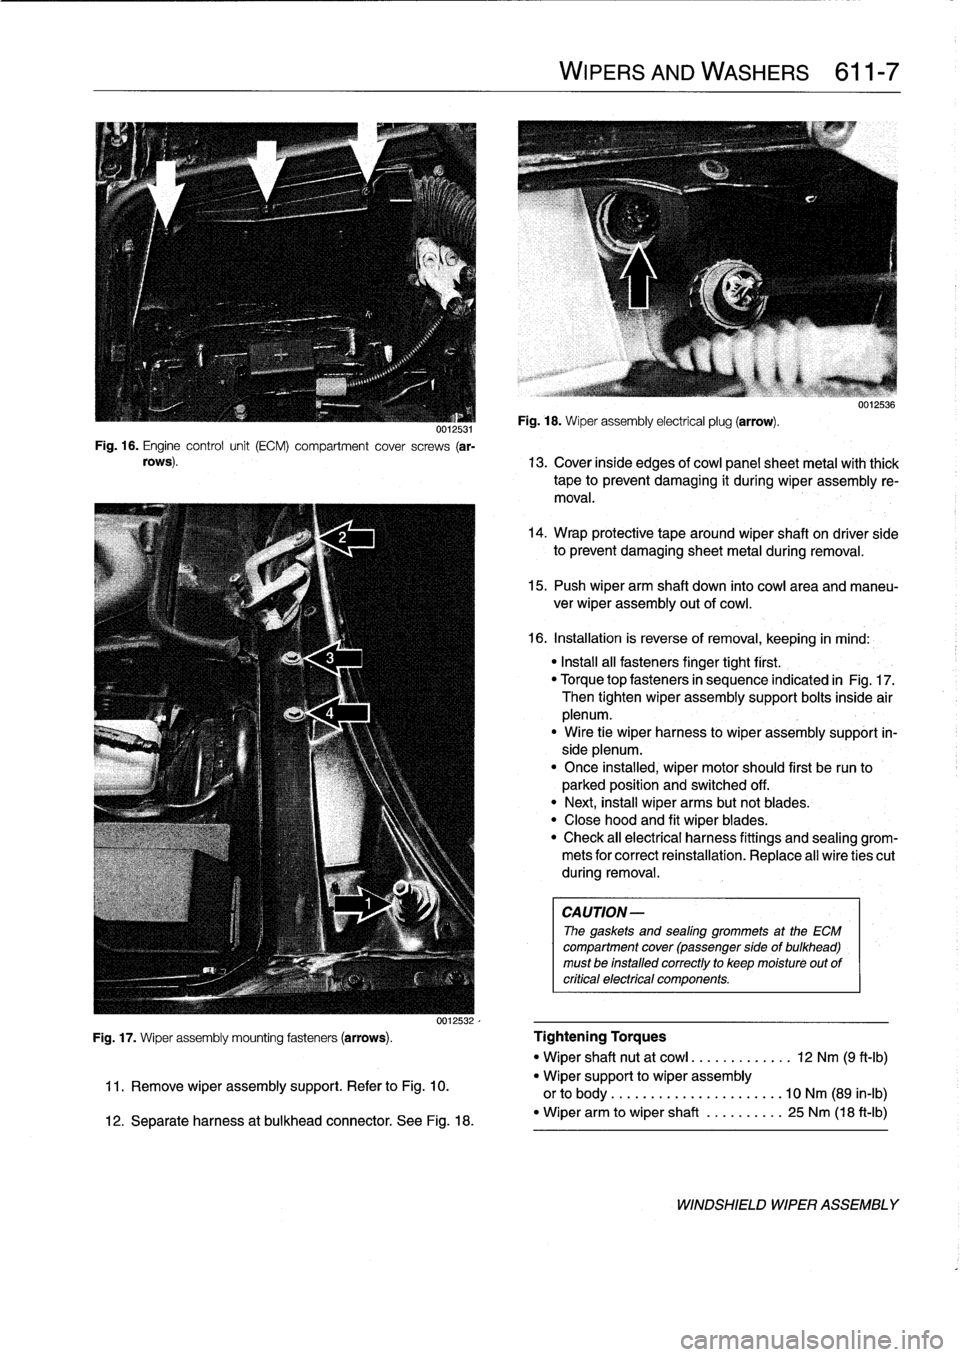 BMW 318i 1998 E36 User Guide 
0012531Fig
.
16
.
Engine
control
unit
(ECM)
compartment
cover
screws
(ar-
rows)
.

WIPERS
AND
WASHERS

	

611-
7

Fig
.
18
.
Wiper
assembly
electrical
plug
(arrow)
.

uu1zbs6

13
.
Cover
inside
edges